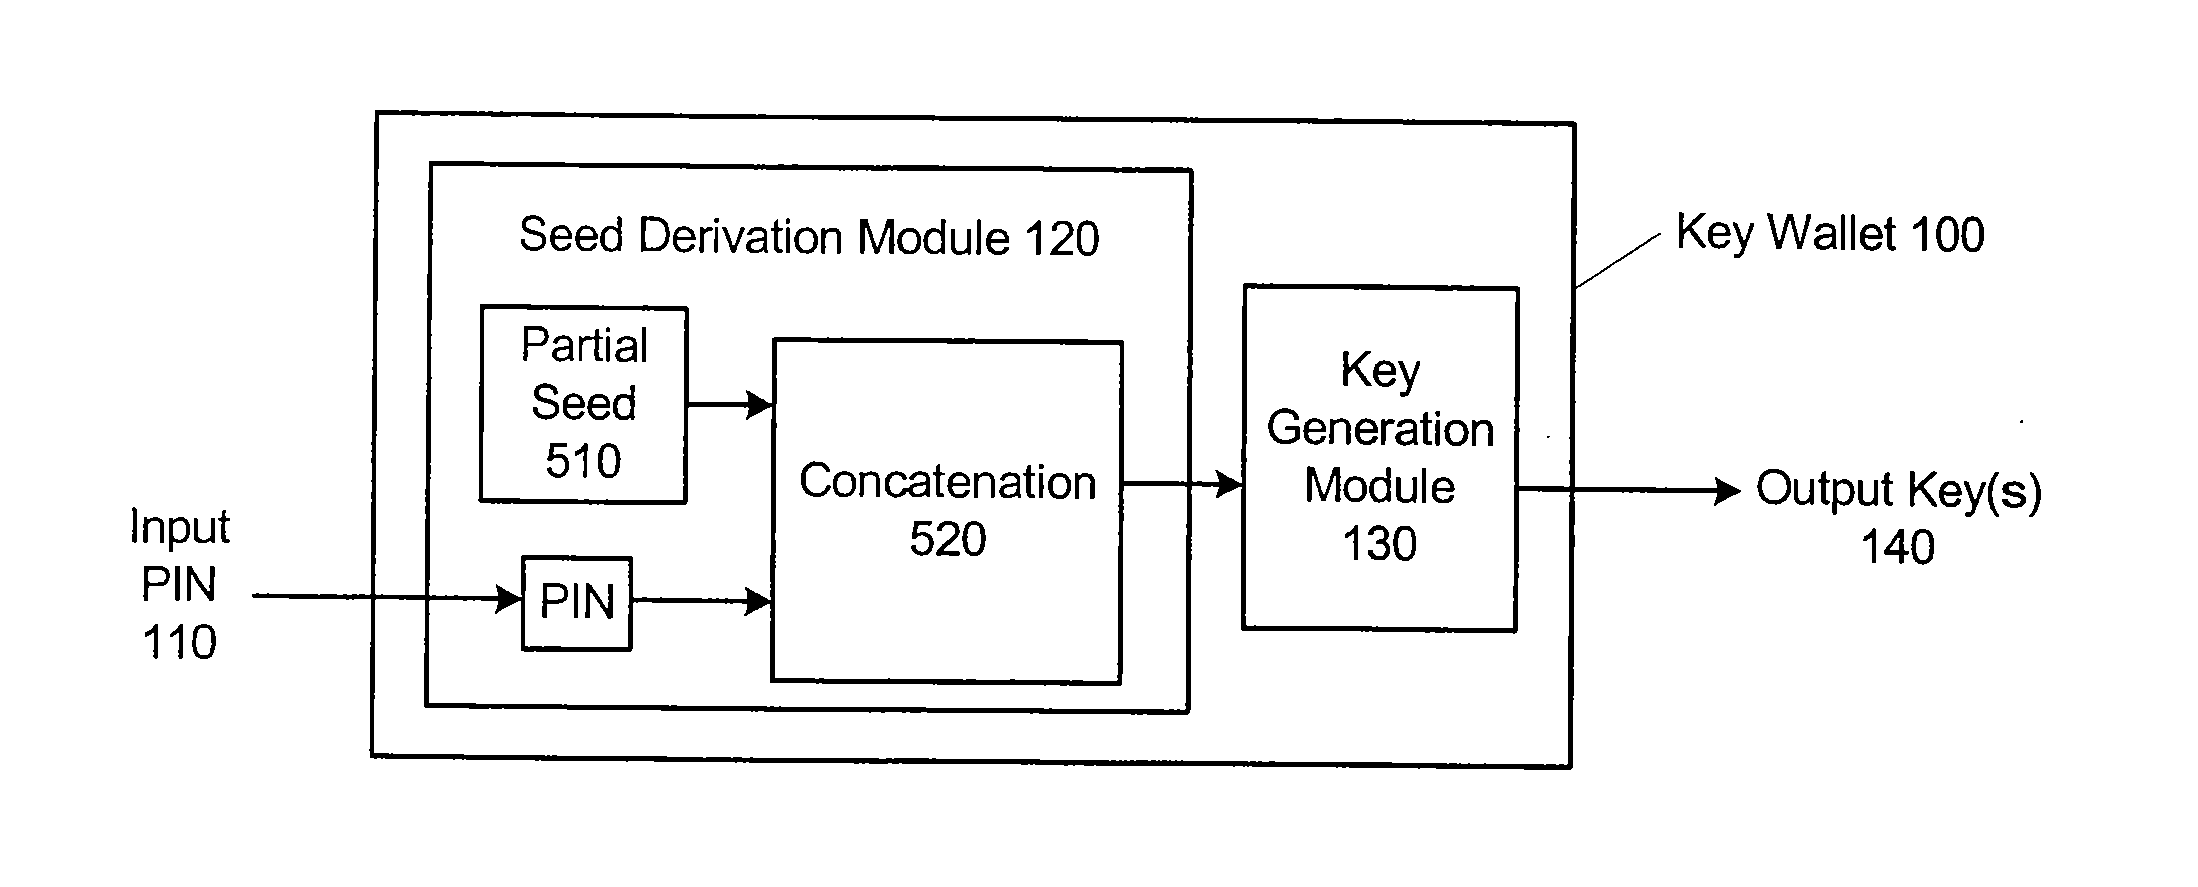 Method And Apparatus For Secure Cryptographic Key Generation, Certification And Use